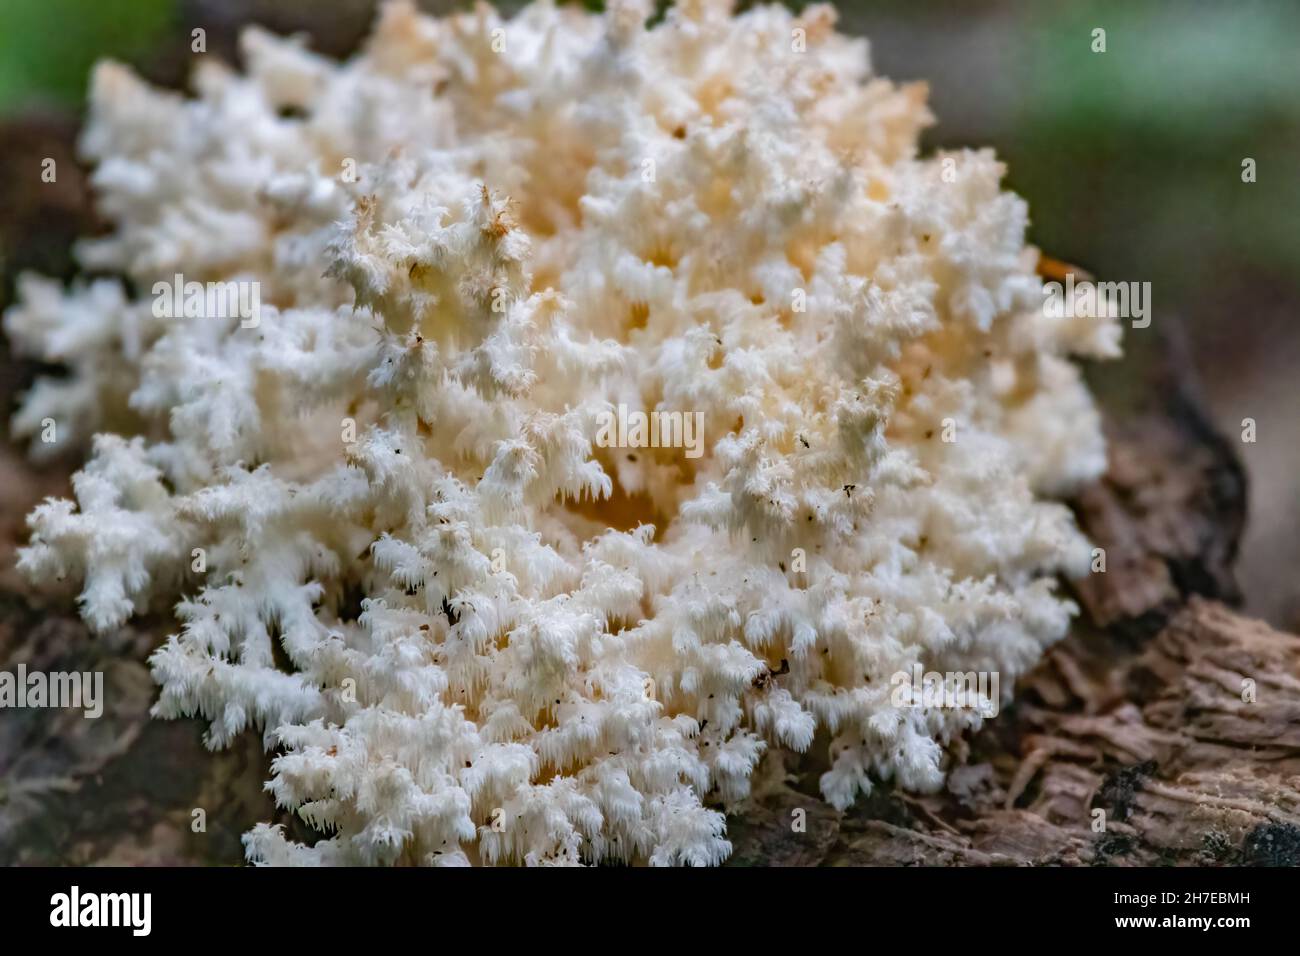 Closeup of Hericium coralloides growing on a dead hardwood tree Stock Photo